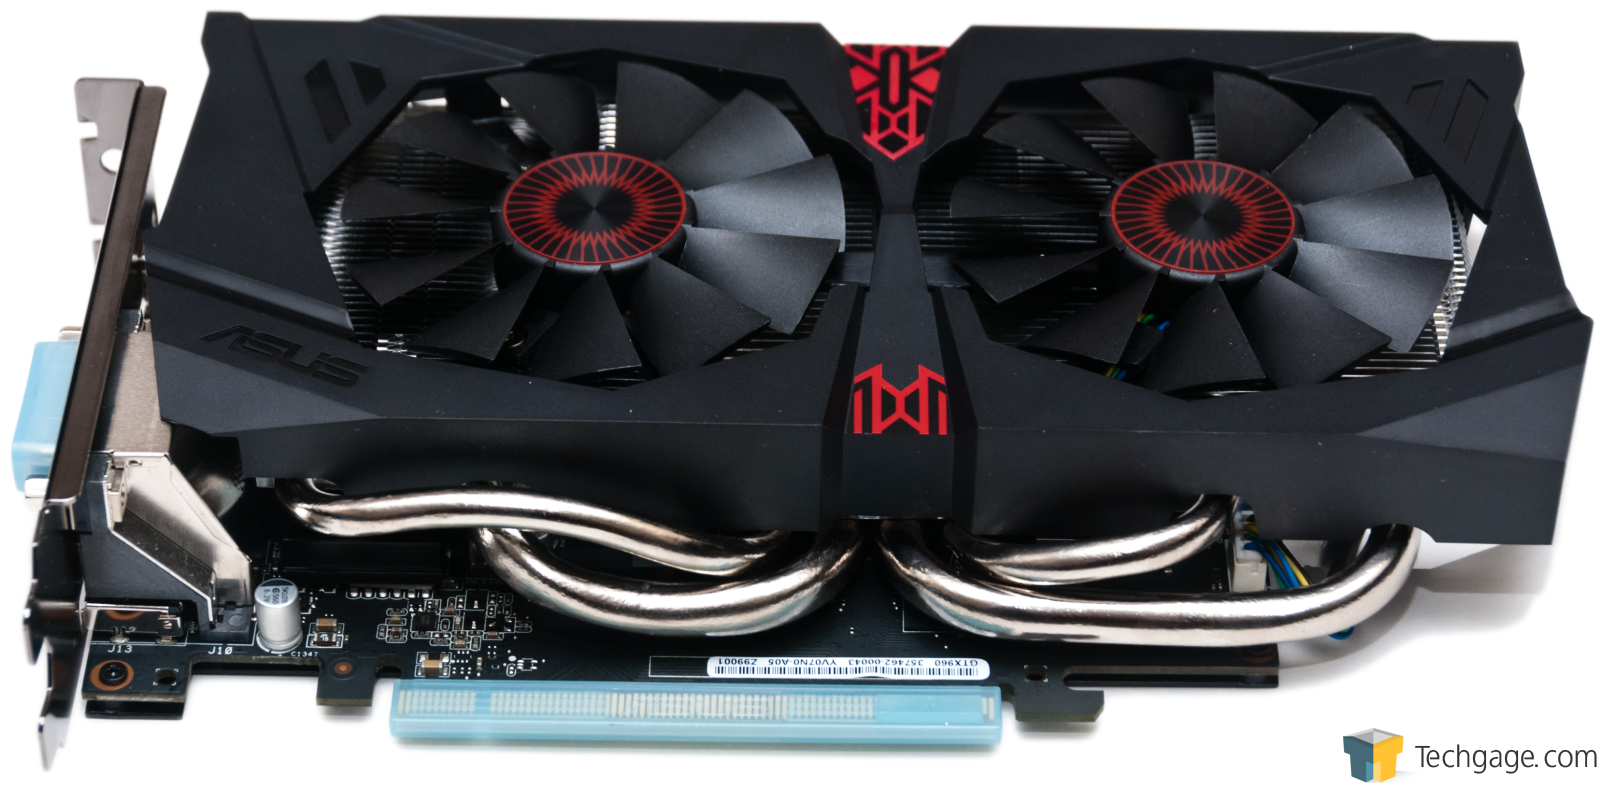 ASUS Strix Edition GeForce GTX 960 Graphics Card Review – Techgage